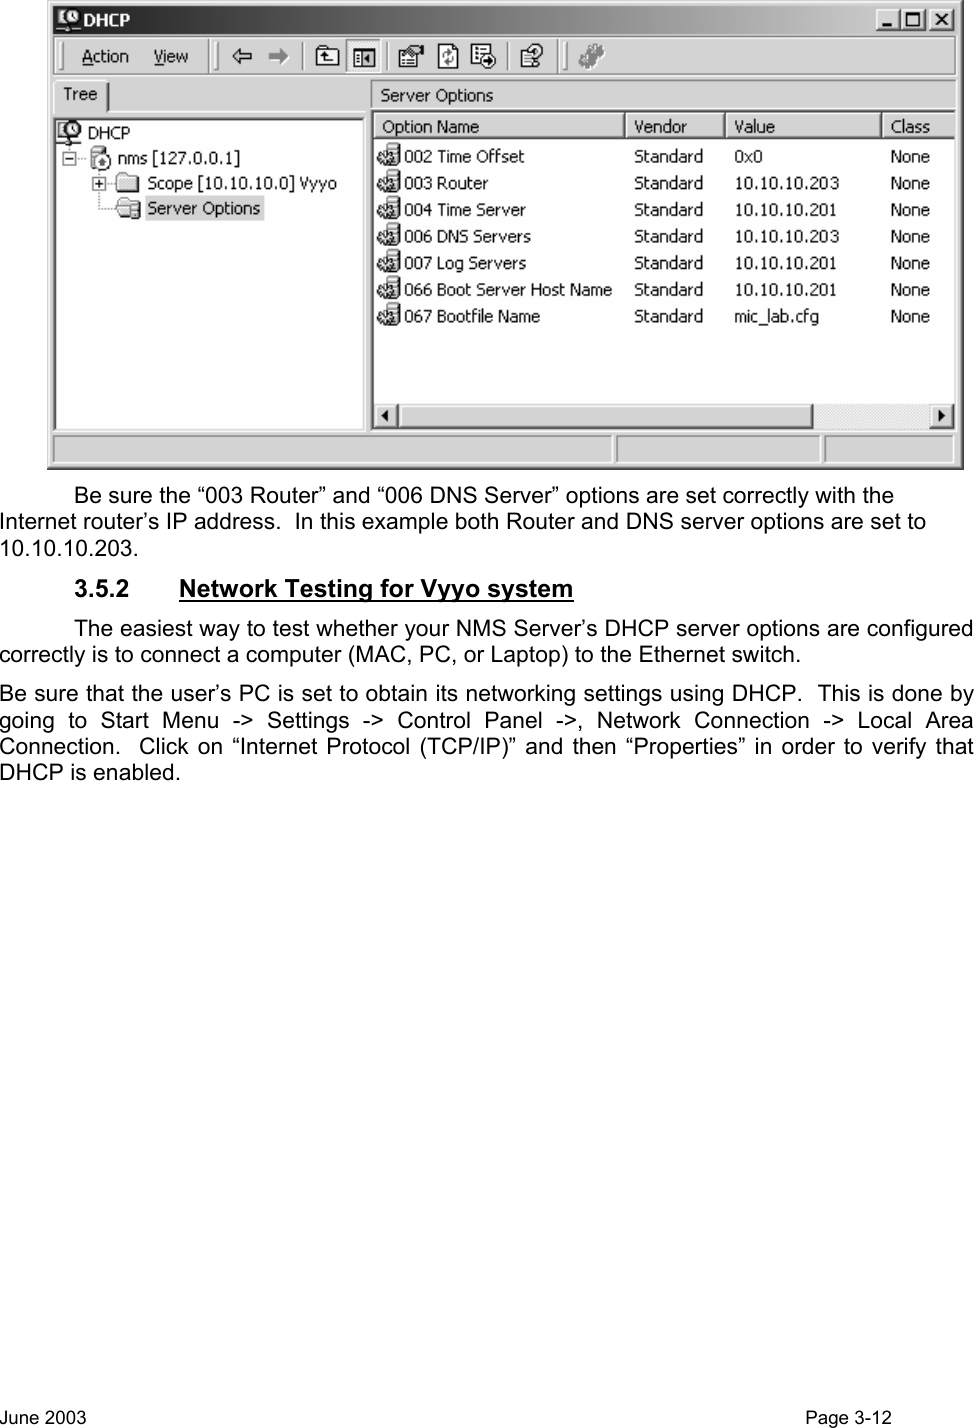   Be sure the “003 Router” and “006 DNS Server” options are set correctly with the Internet router’s IP address.  In this example both Router and DNS server options are set to 10.10.10.203.  3.5.2  Network Testing for Vyyo system   The easiest way to test whether your NMS Server’s DHCP server options are configured correctly is to connect a computer (MAC, PC, or Laptop) to the Ethernet switch.   Be sure that the user’s PC is set to obtain its networking settings using DHCP.  This is done by going to Start Menu -&gt; Settings -&gt; Control Panel -&gt;, Network Connection -&gt; Local Area Connection.  Click on “Internet Protocol (TCP/IP)” and then “Properties” in order to verify that DHCP is enabled. June 2003                                                                                                                                          Page 3-12  